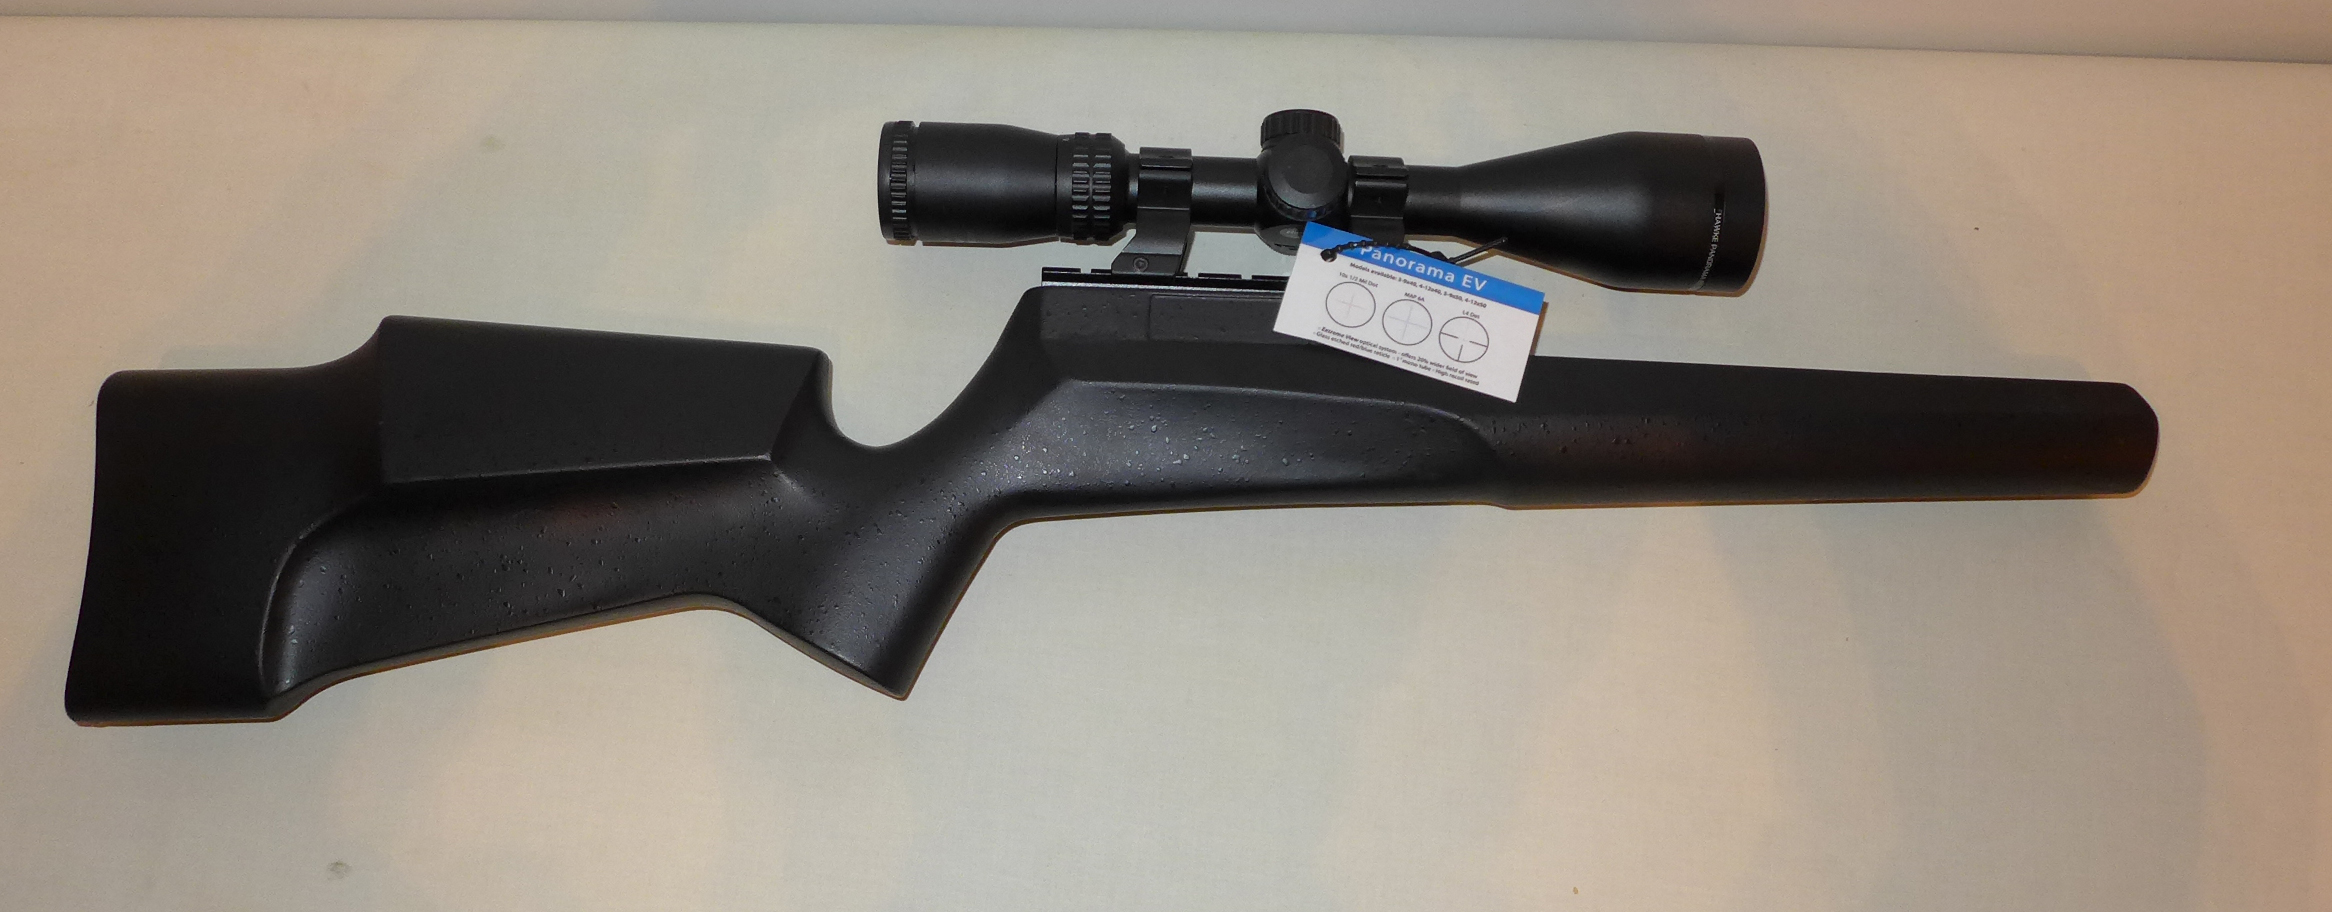 A brand new Hawke Panorama EV 3-9 x50 IR telescopic sights Mounted on a Hawke practice synthetic